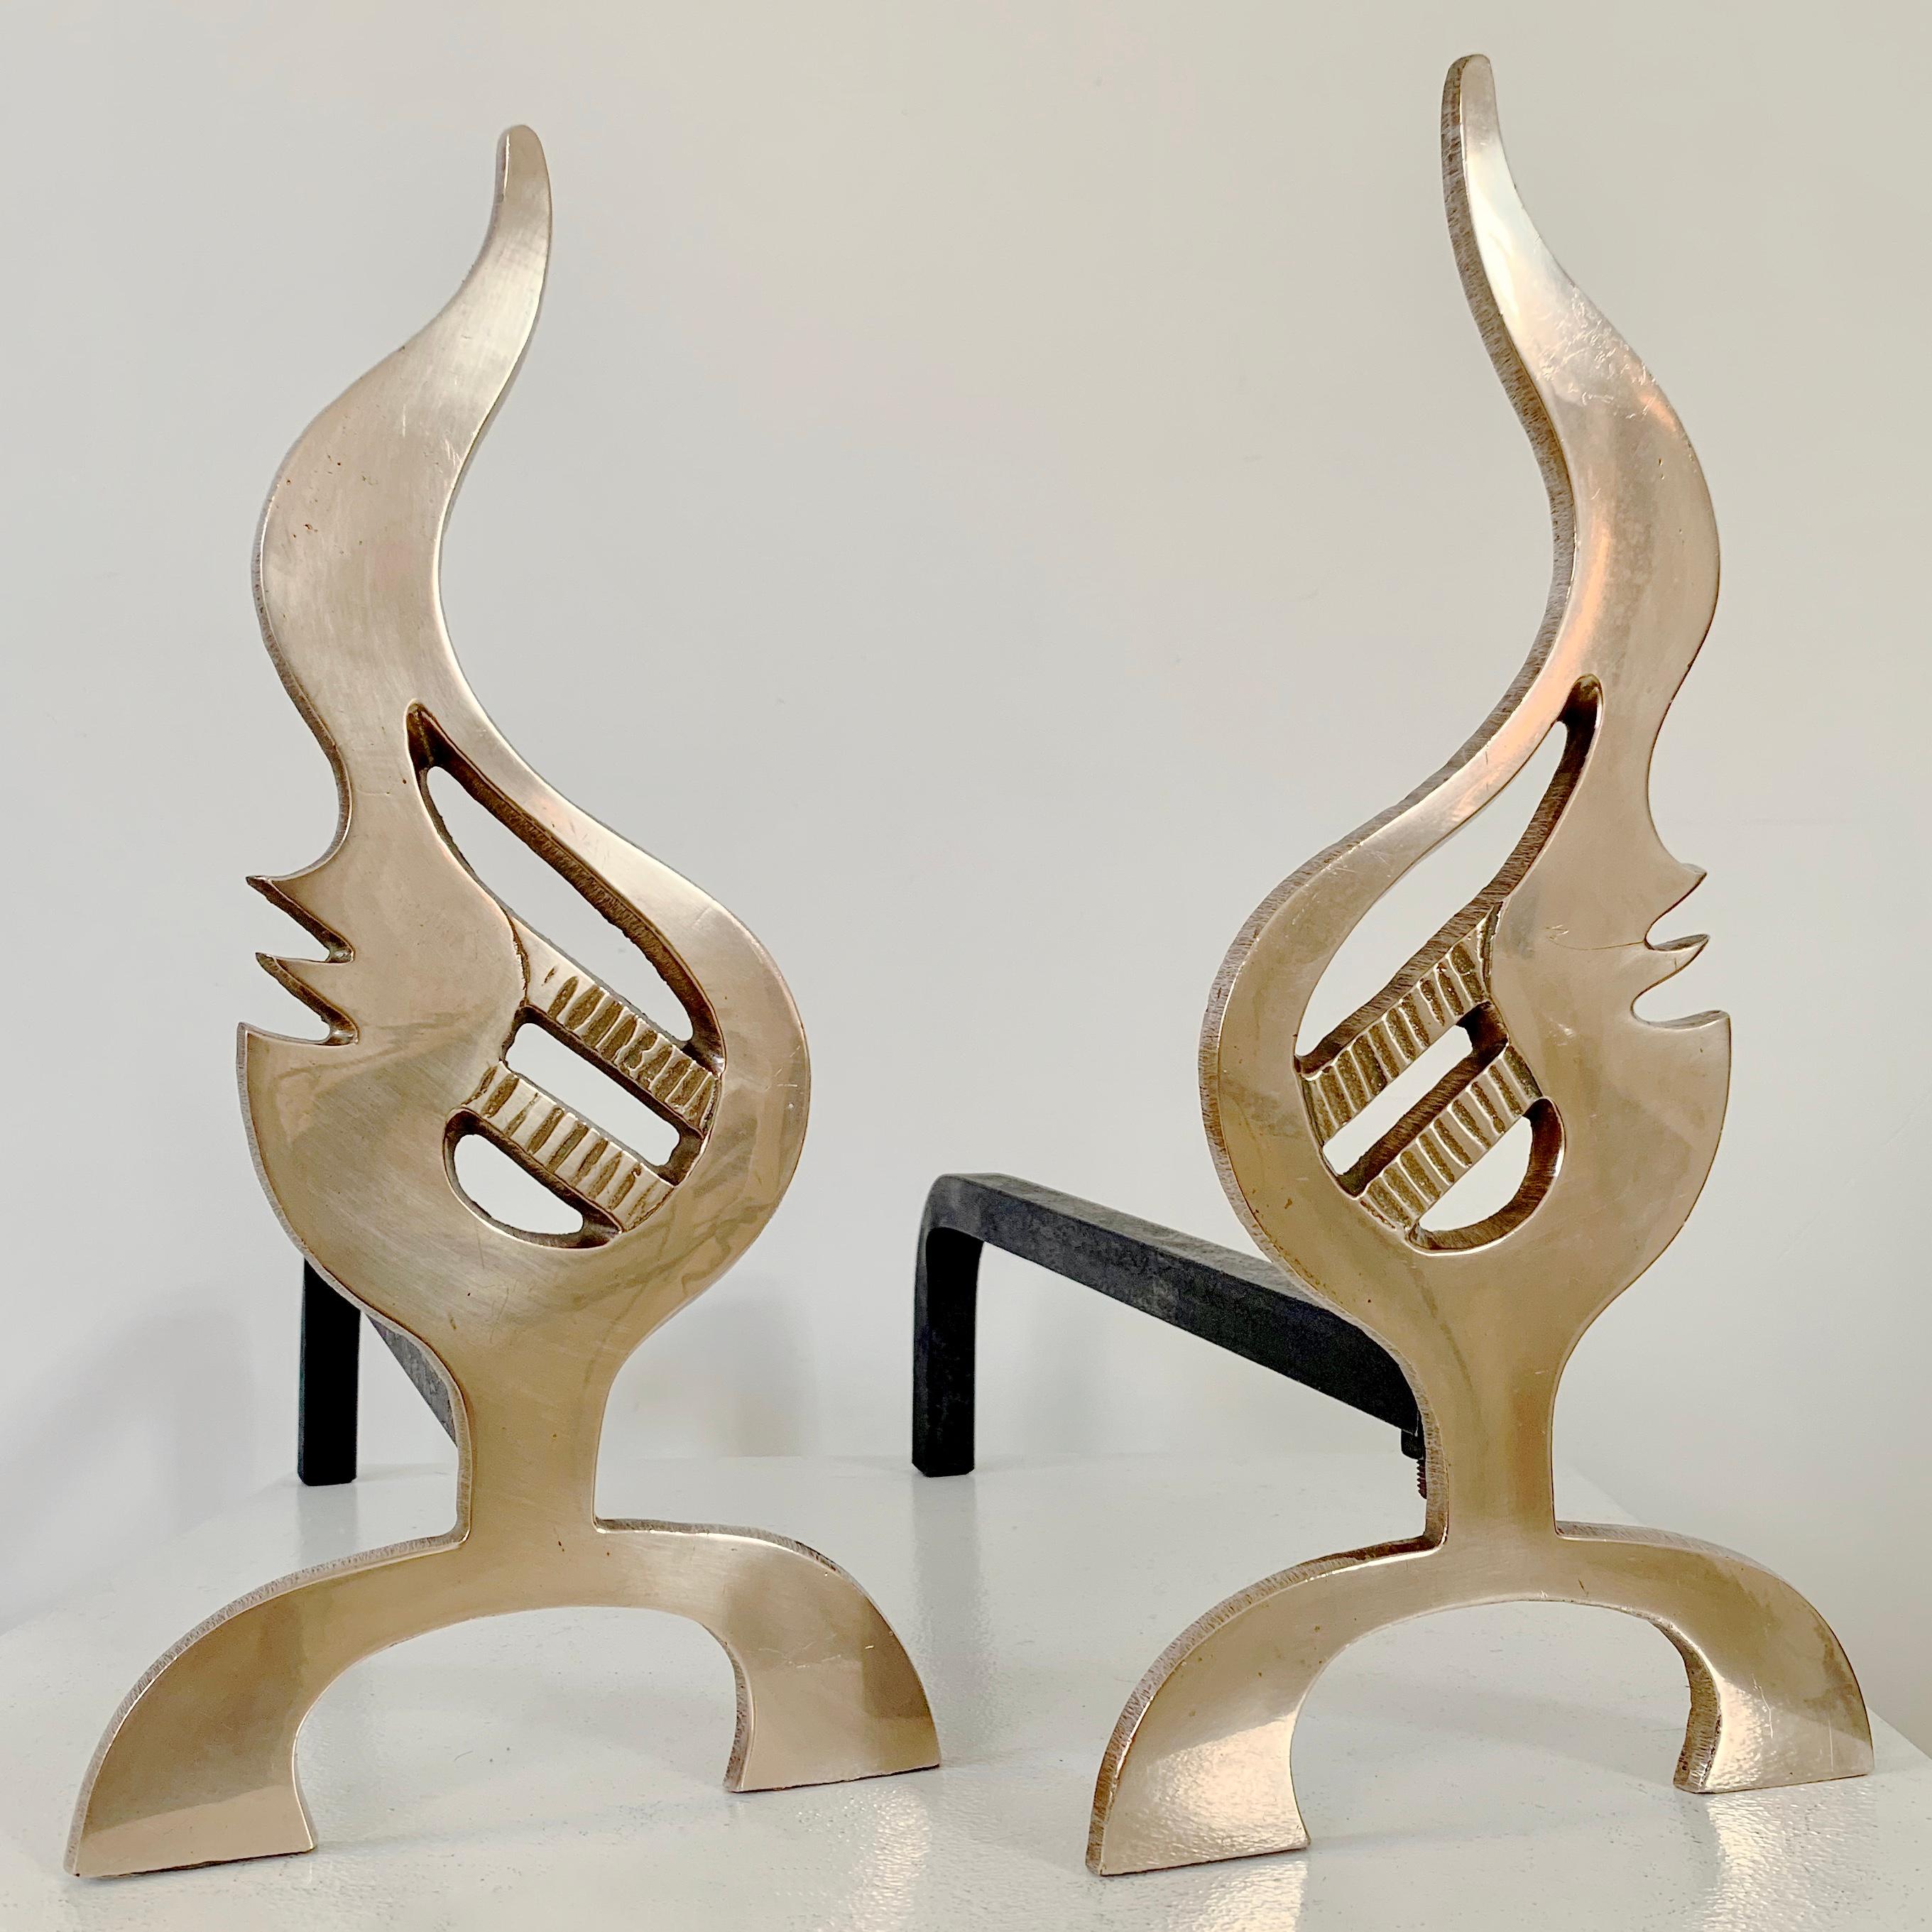 Very nice pair of stylised flame andirons, circa 1960, France.
Polished brass, wrought iron.
Dimensions: 43 cm D, 38 cm H, 18 cm W.
All purchases are covered by our Buyer Protection Guarantee.
This item can be returned within 7 days of